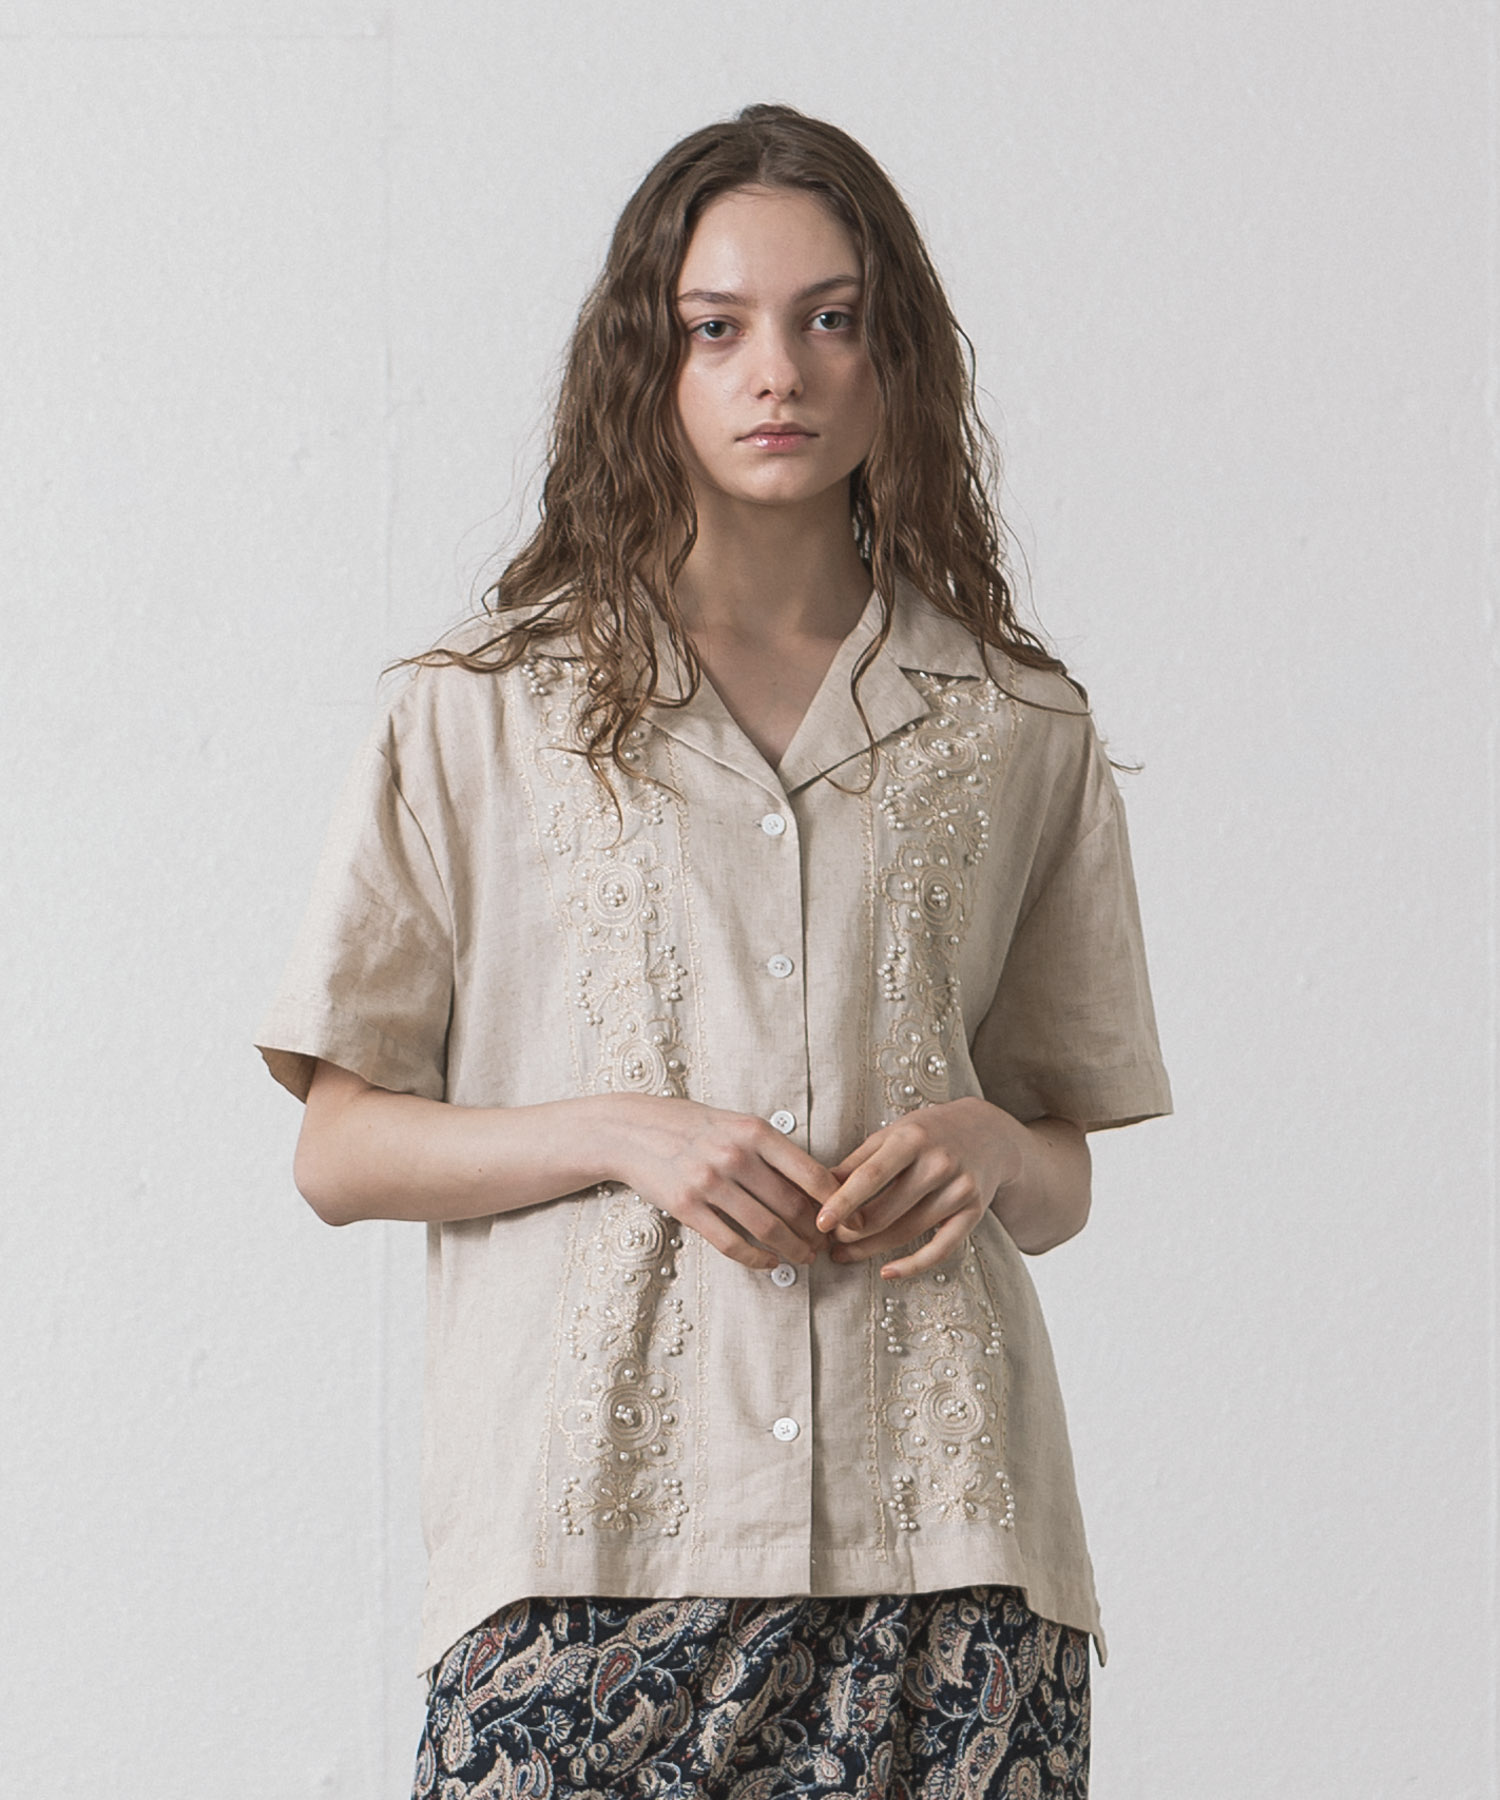 Embroidery Open Collar Shirt - NATURAL